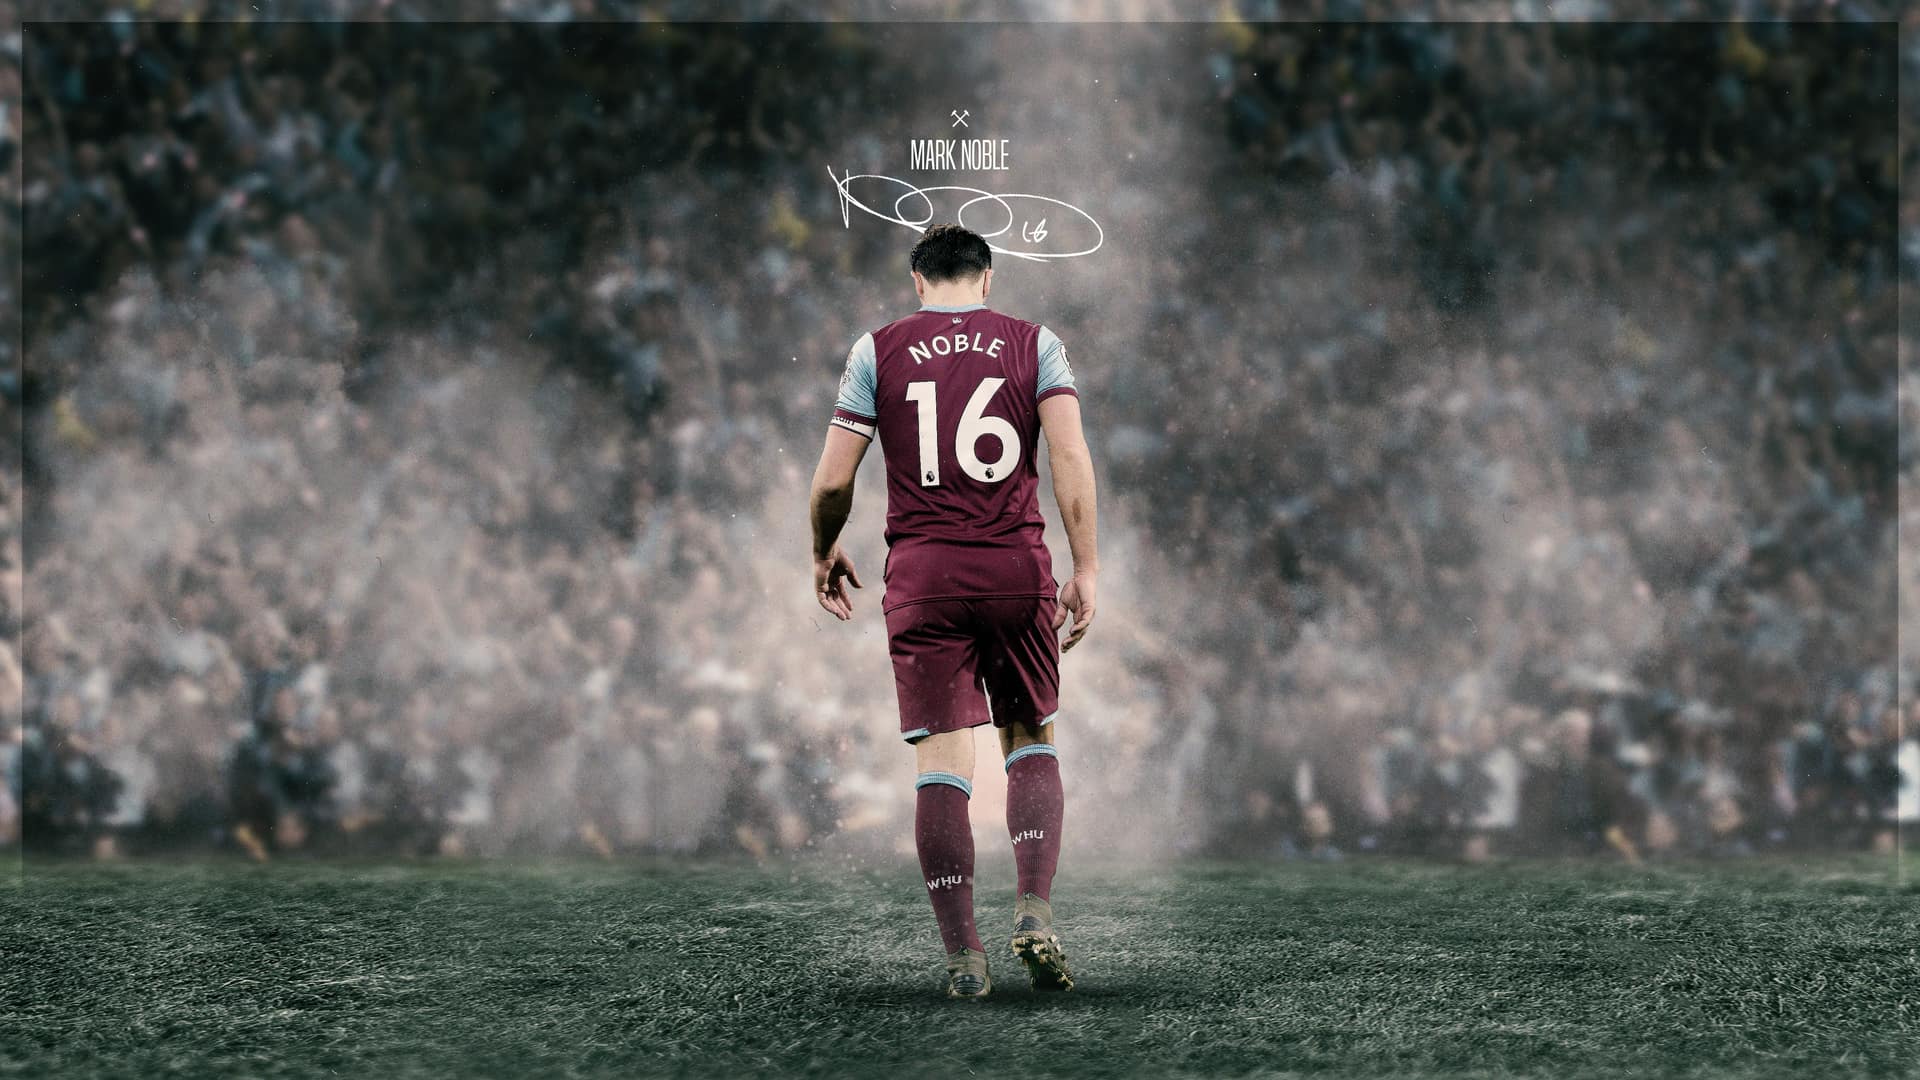 WallpaperWednesday: Noble, Fabianski and Flaherty wallpaper to download. West Ham United